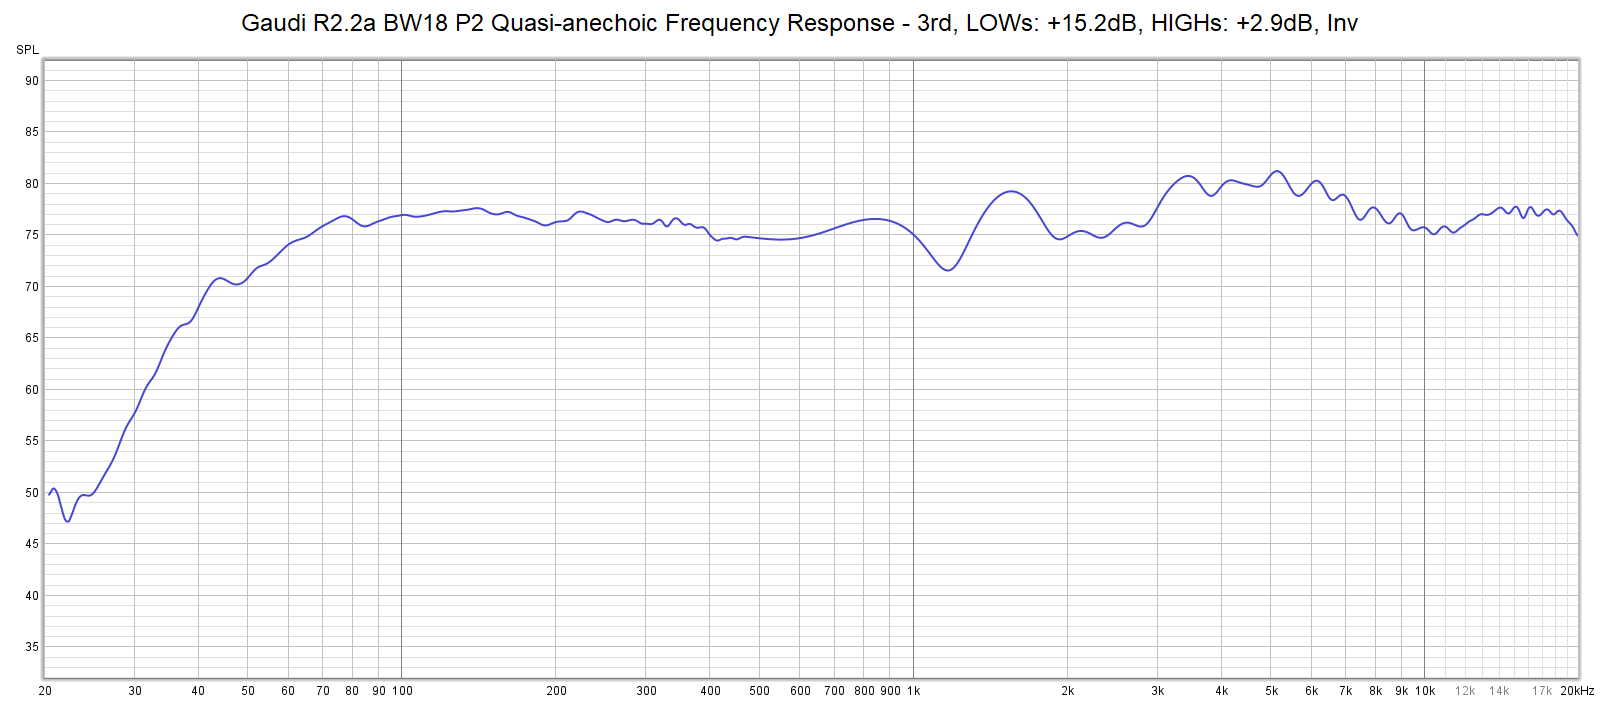 Quasi-anechoic frequency response of Gaudi R2.2, P2 inverted